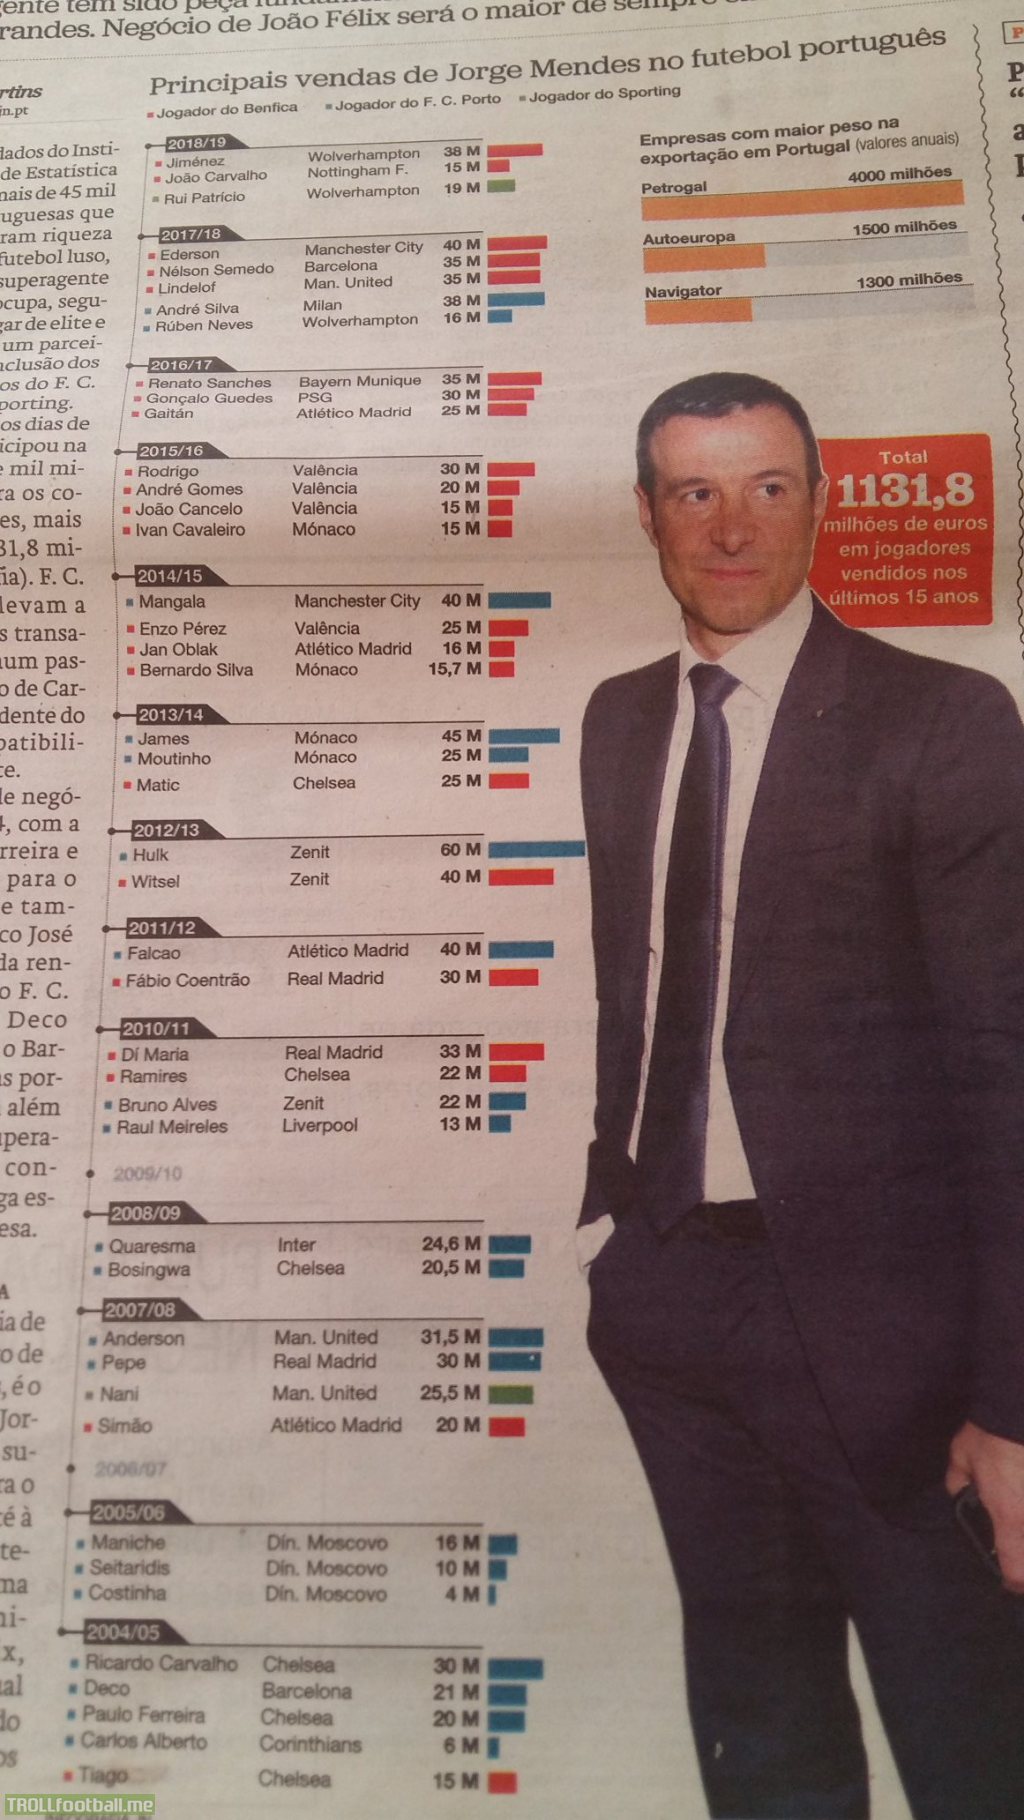 List of biggest transfers in Portugal brokered by Jorge Mendes in the last 15 years